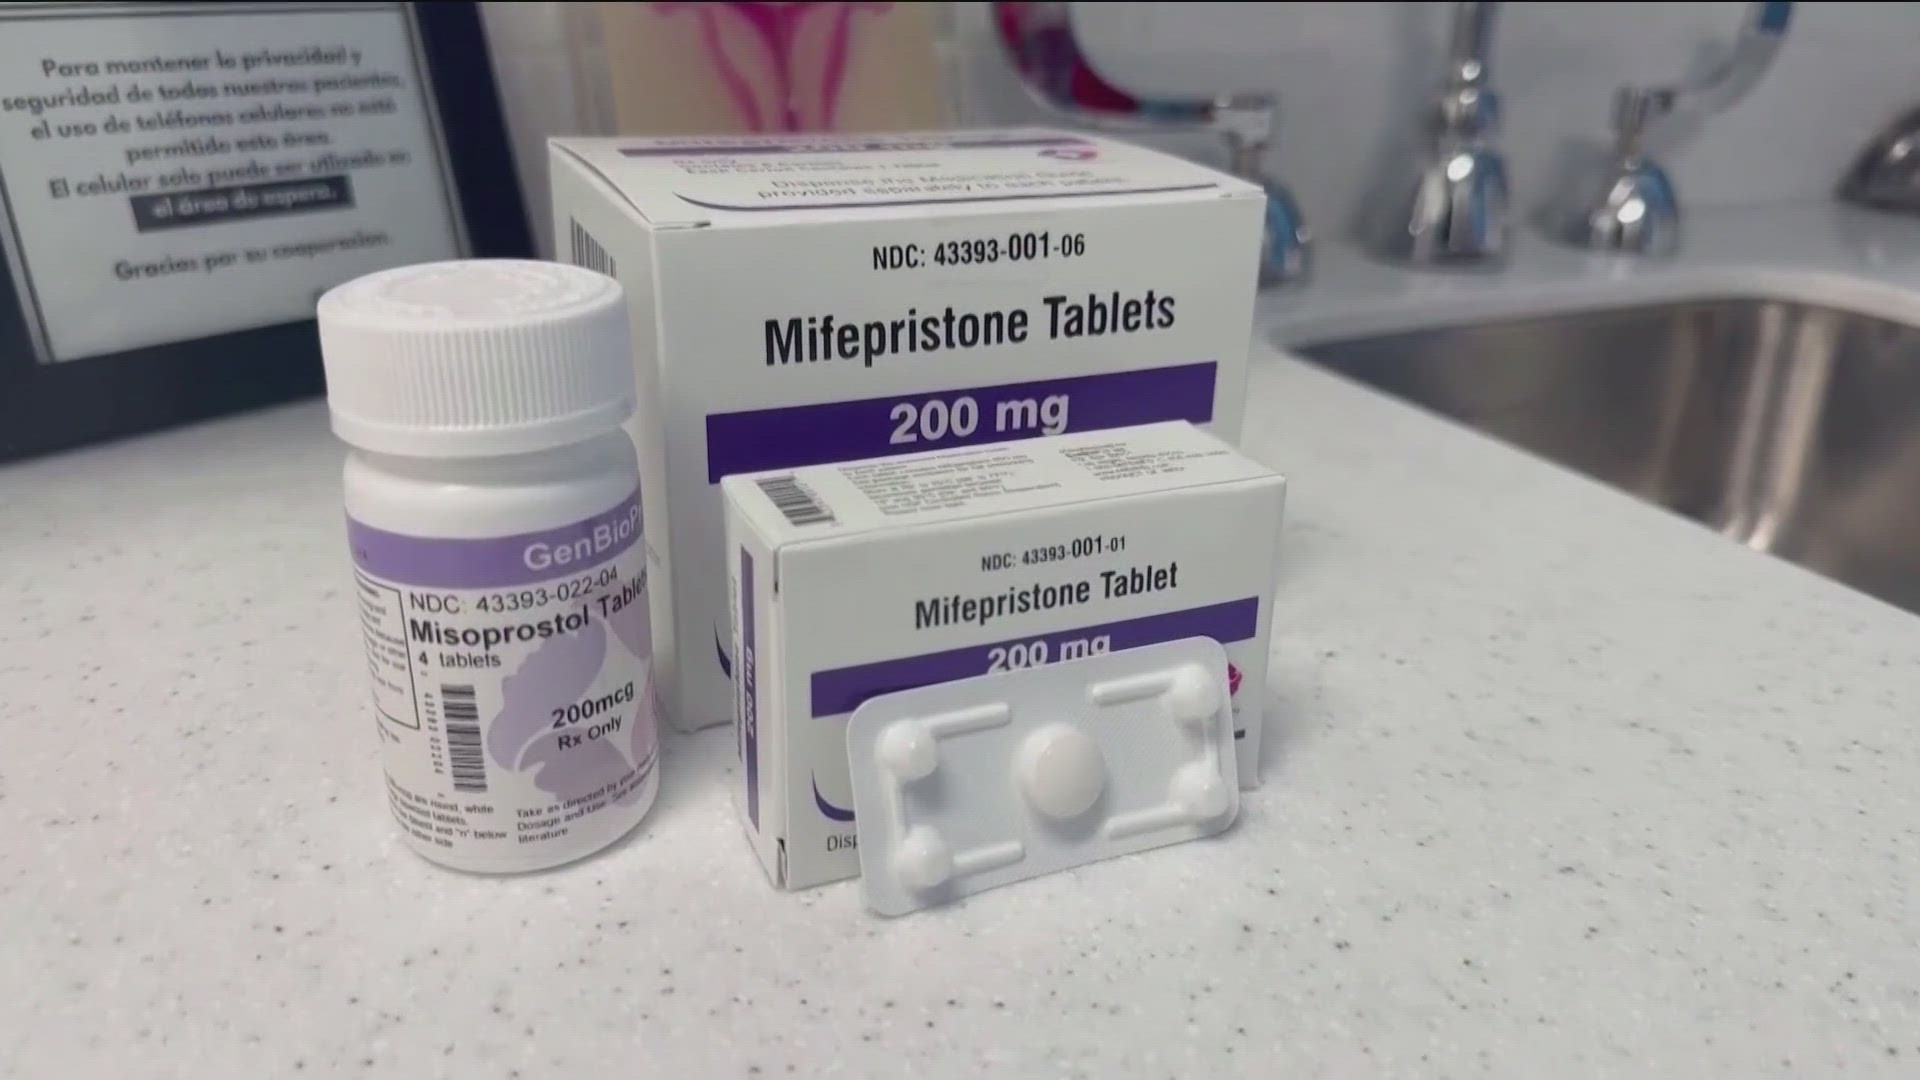 Access to the abortion pill Mifepristone is causing controversy in the U.S. Watch the video to learn more.